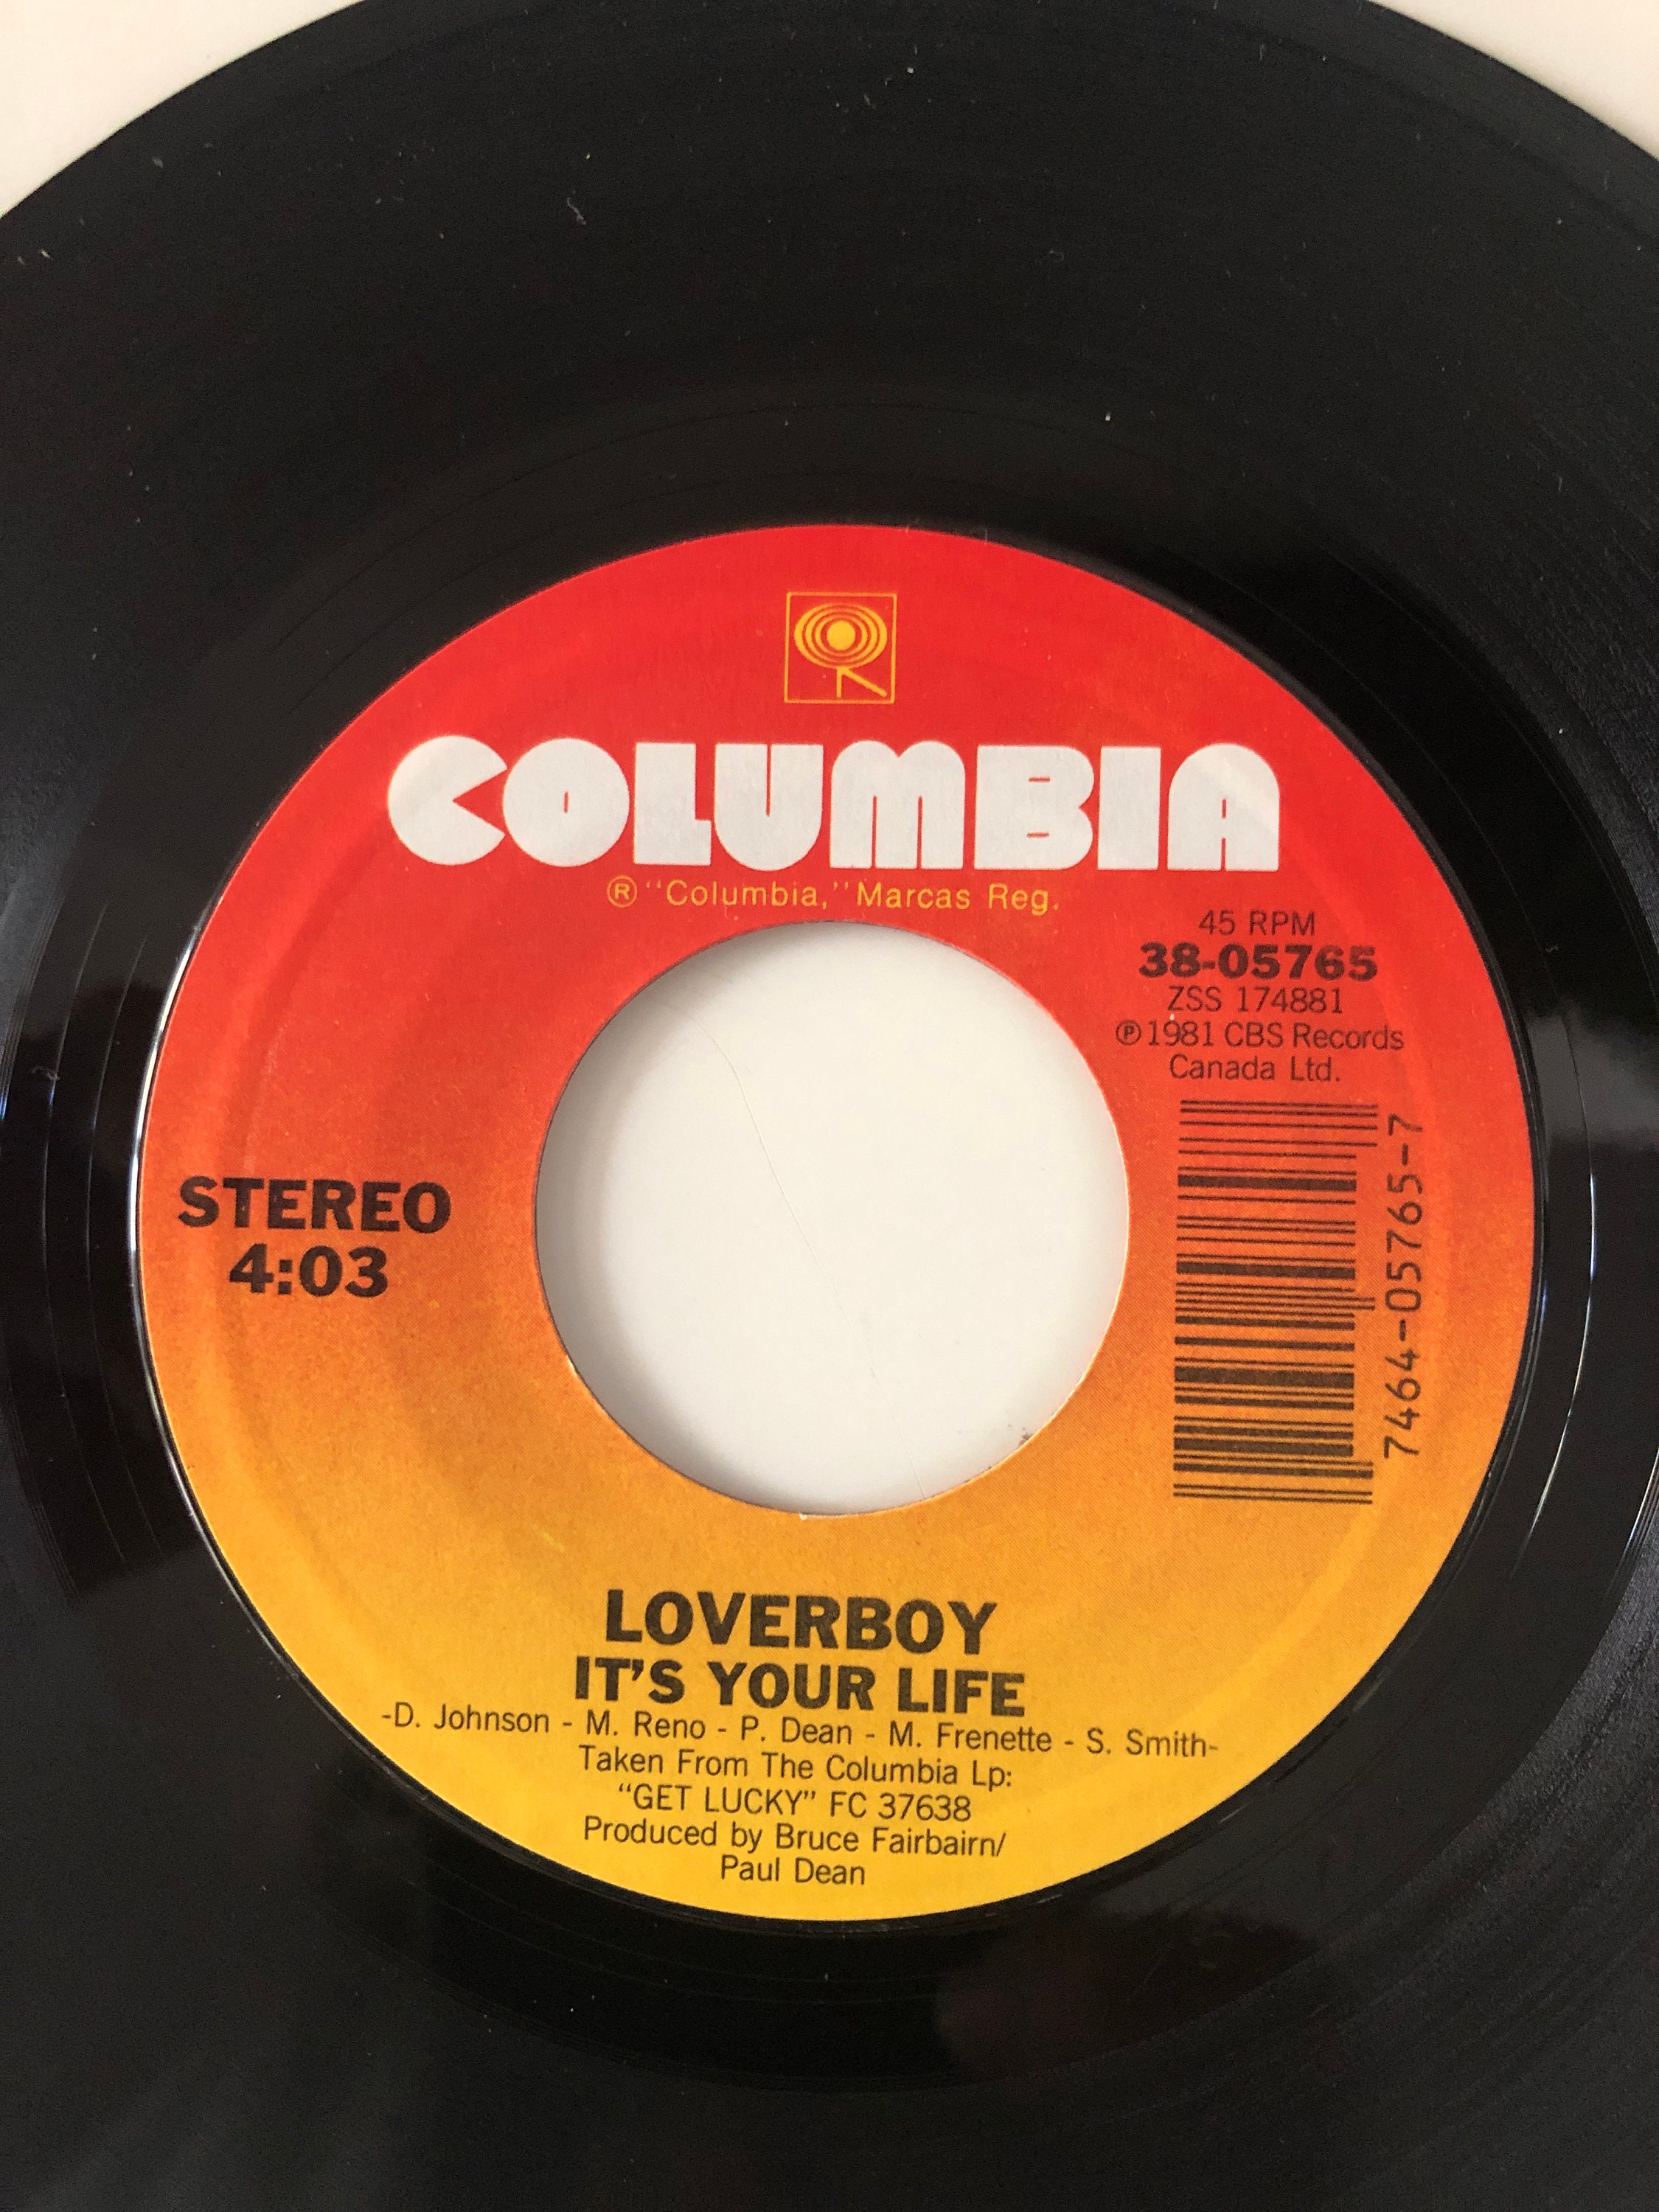 LOVERBOY « Working For The Weekend » Disque vinyle 45 tours